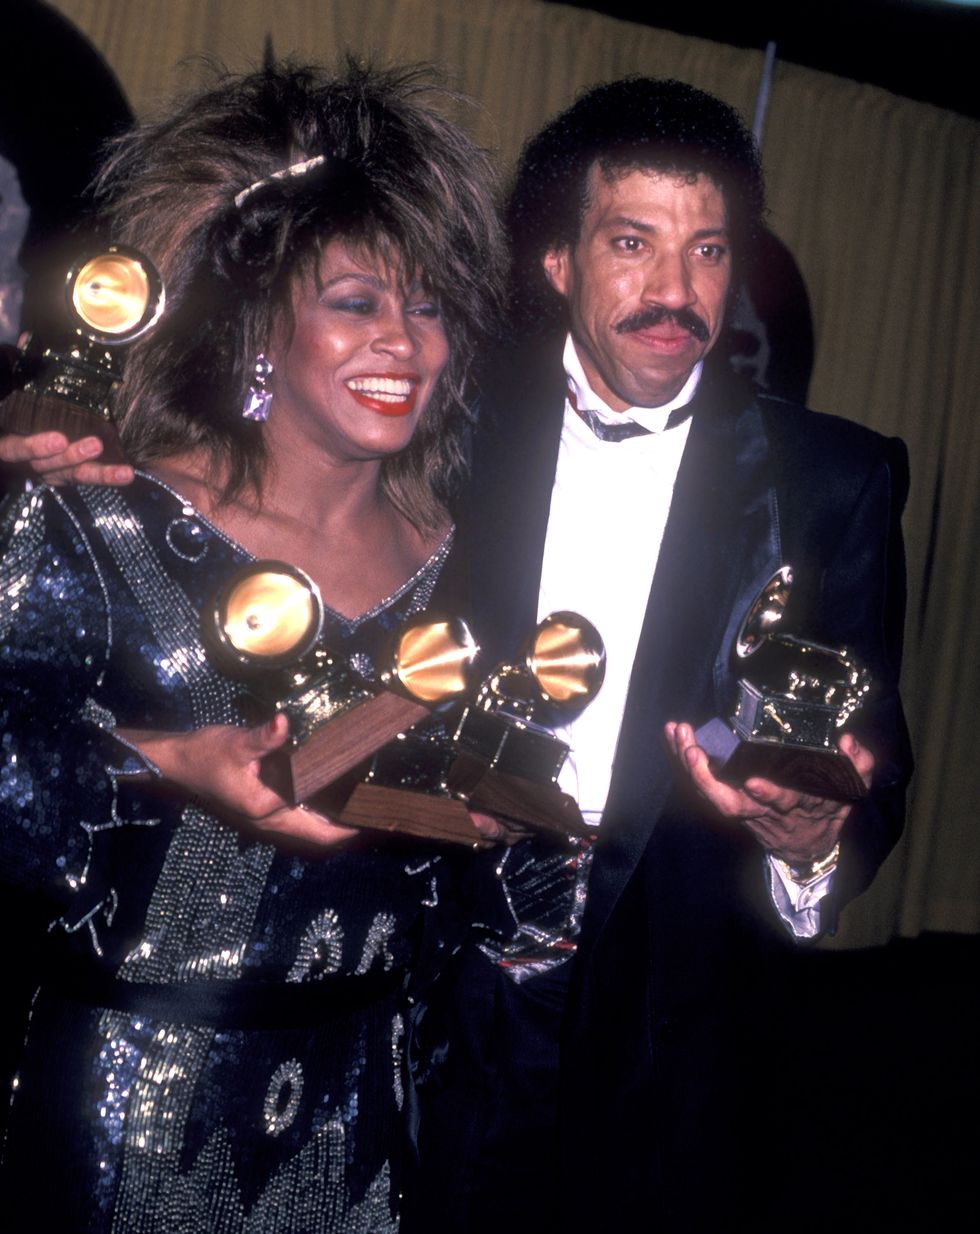 tina turner and lionel richie hold grammy trophies while standing together